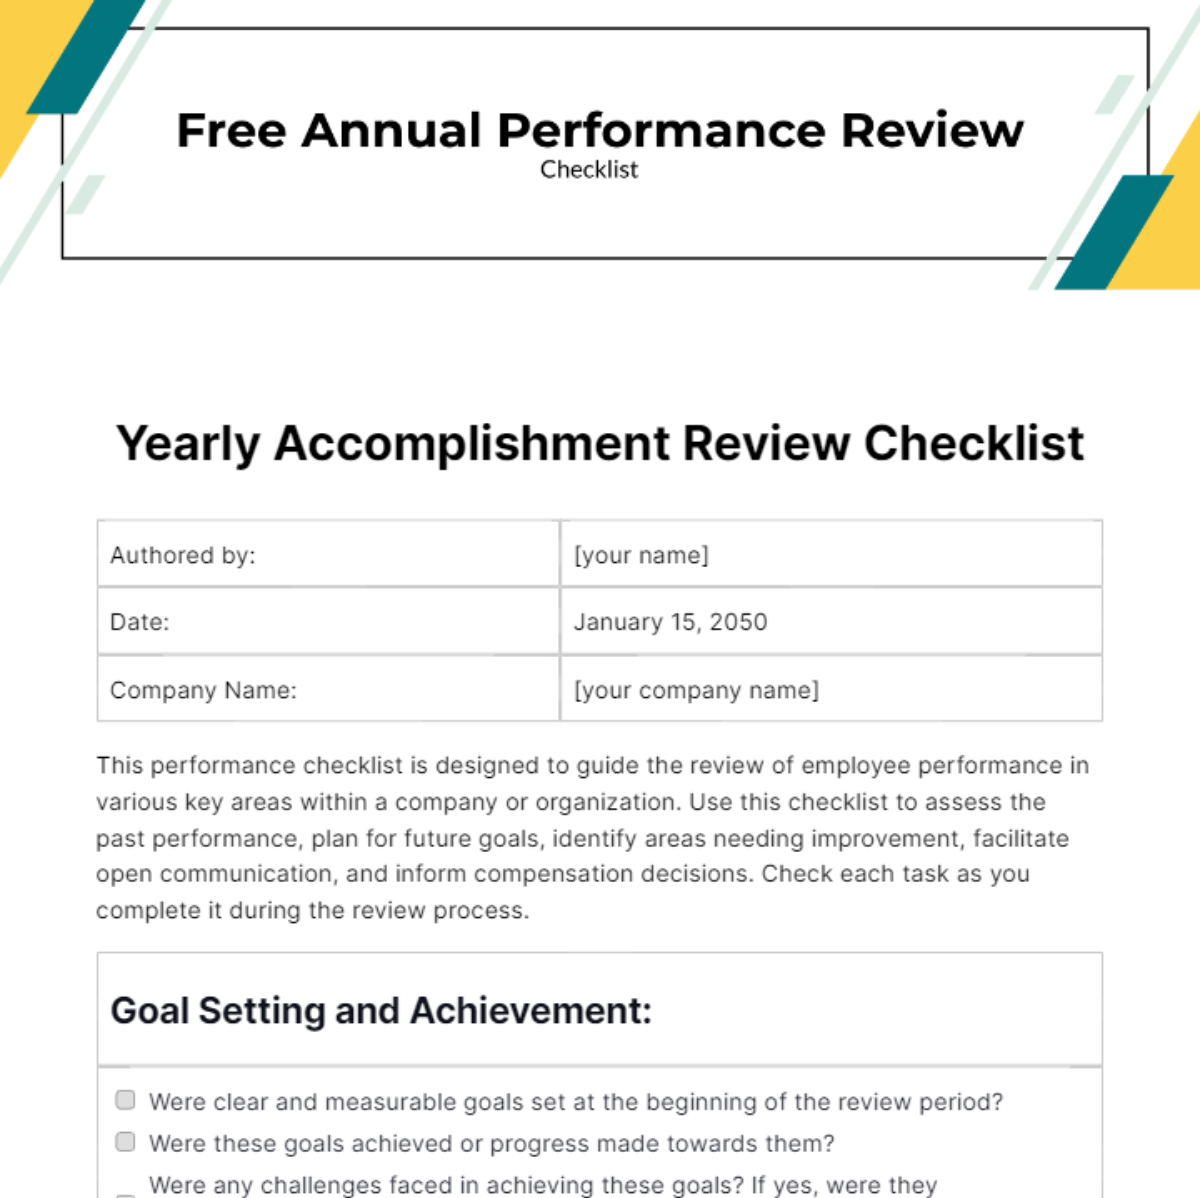 Annual Performance Review Checklist Template